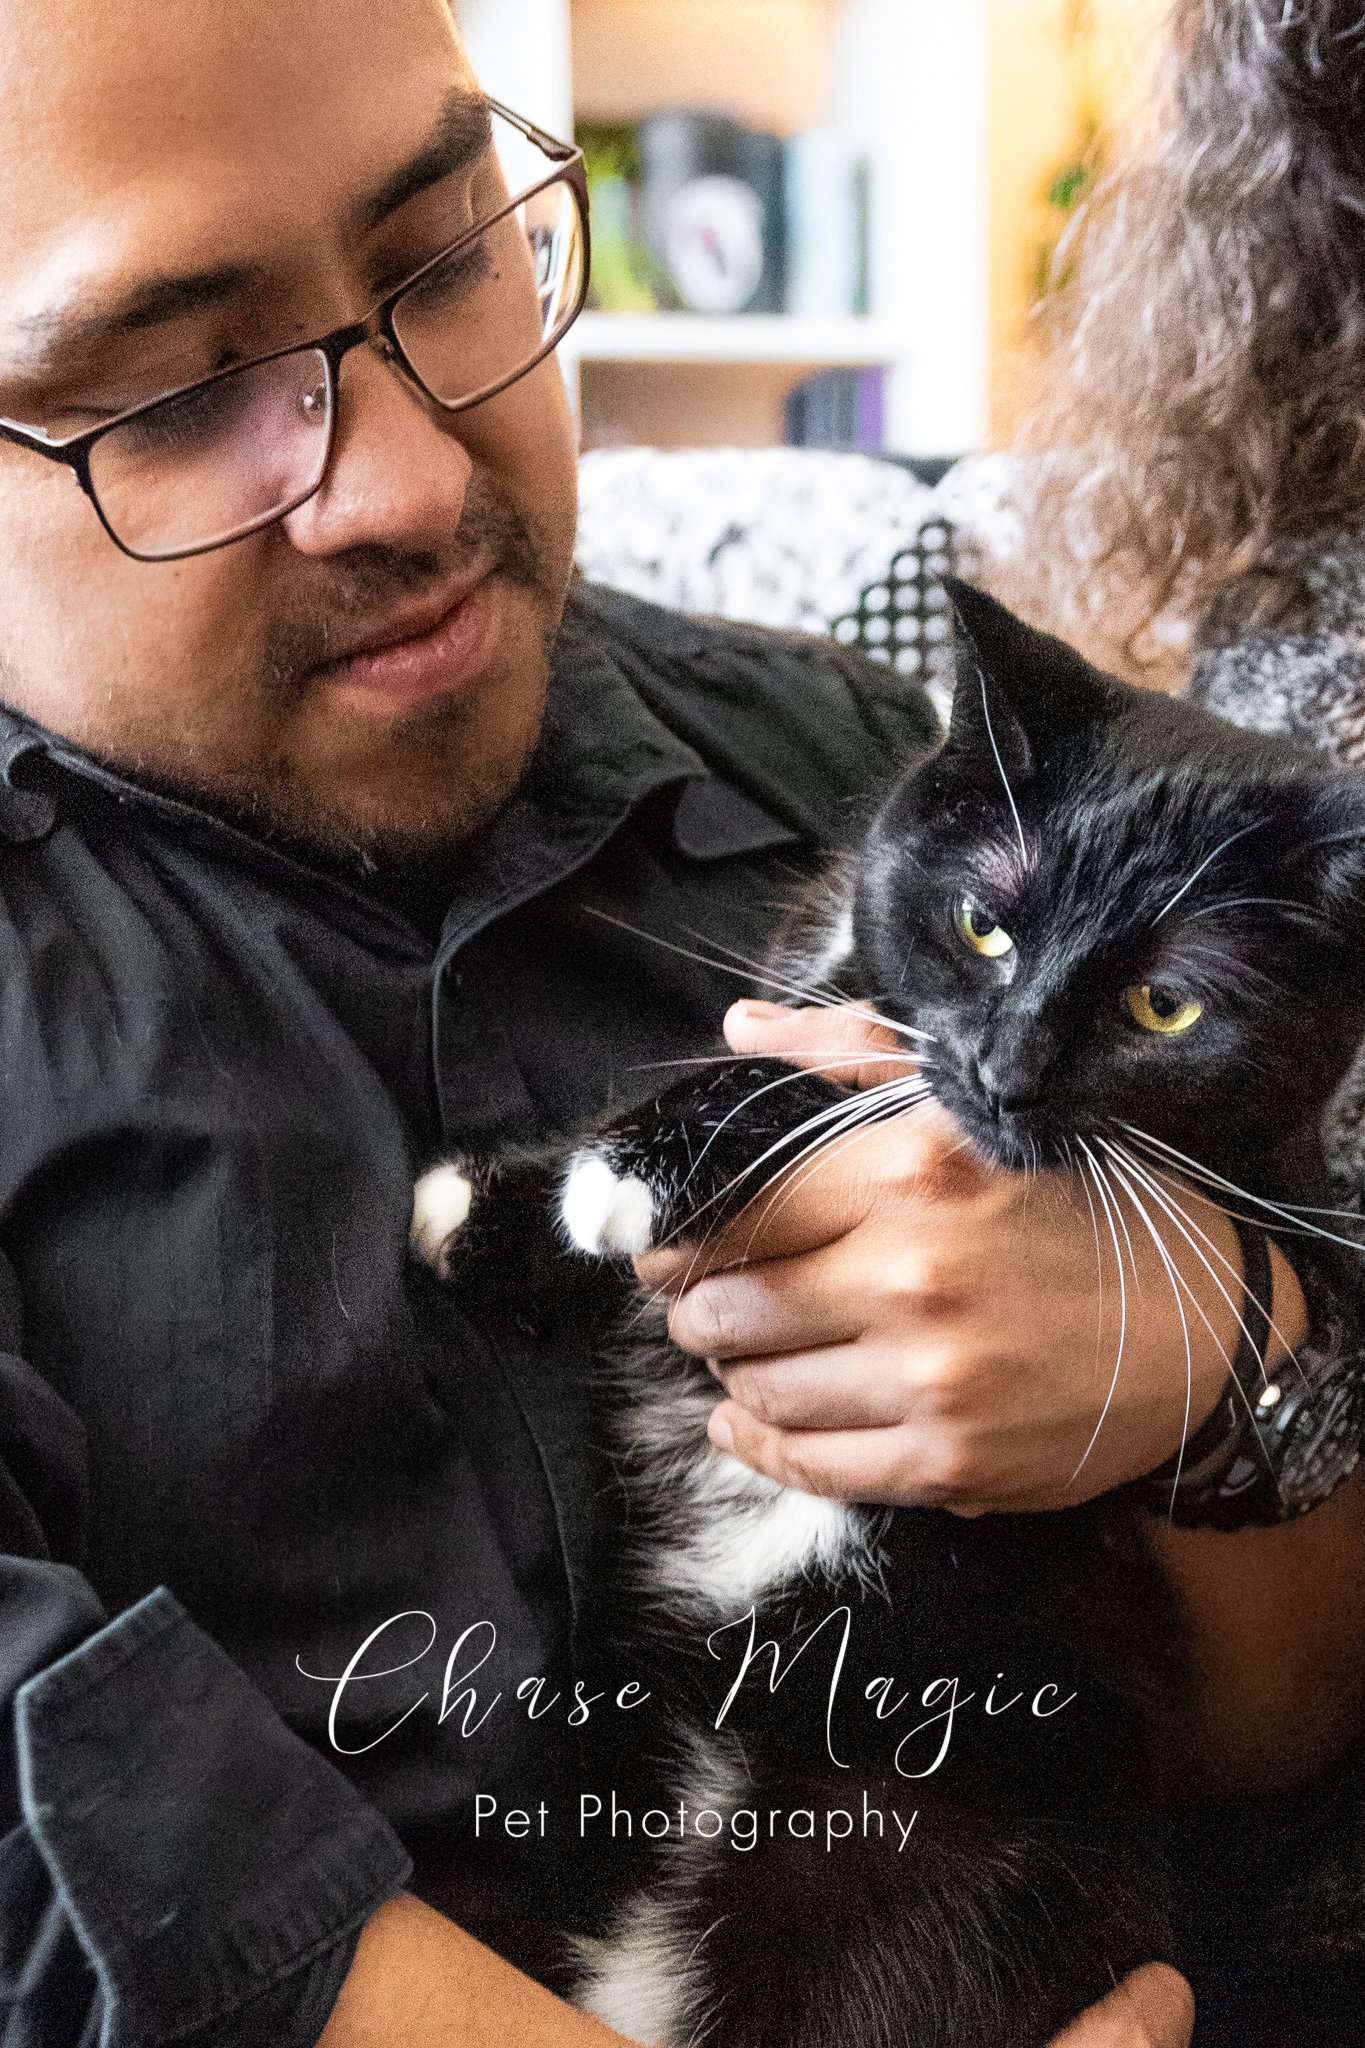 cute black and white cat cuddling with a man with glasses